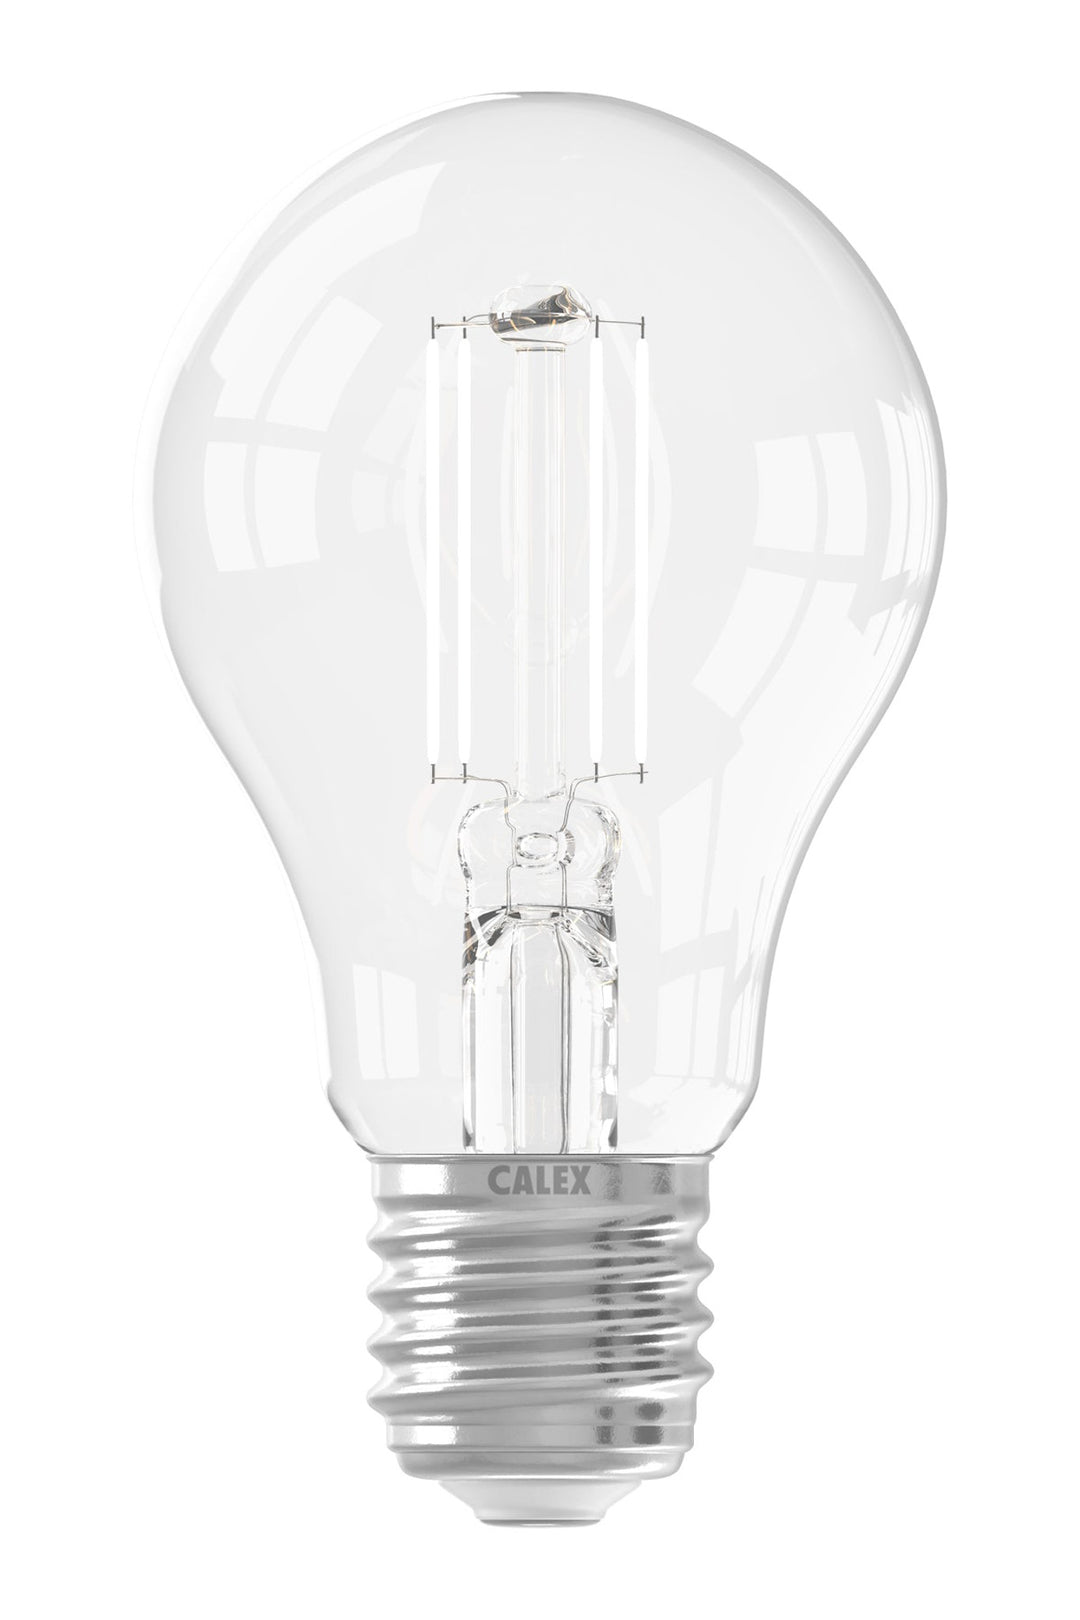 Calex LED Functional Filament GLS Lamp A60, Clear, E27, Dimmable 1101006900